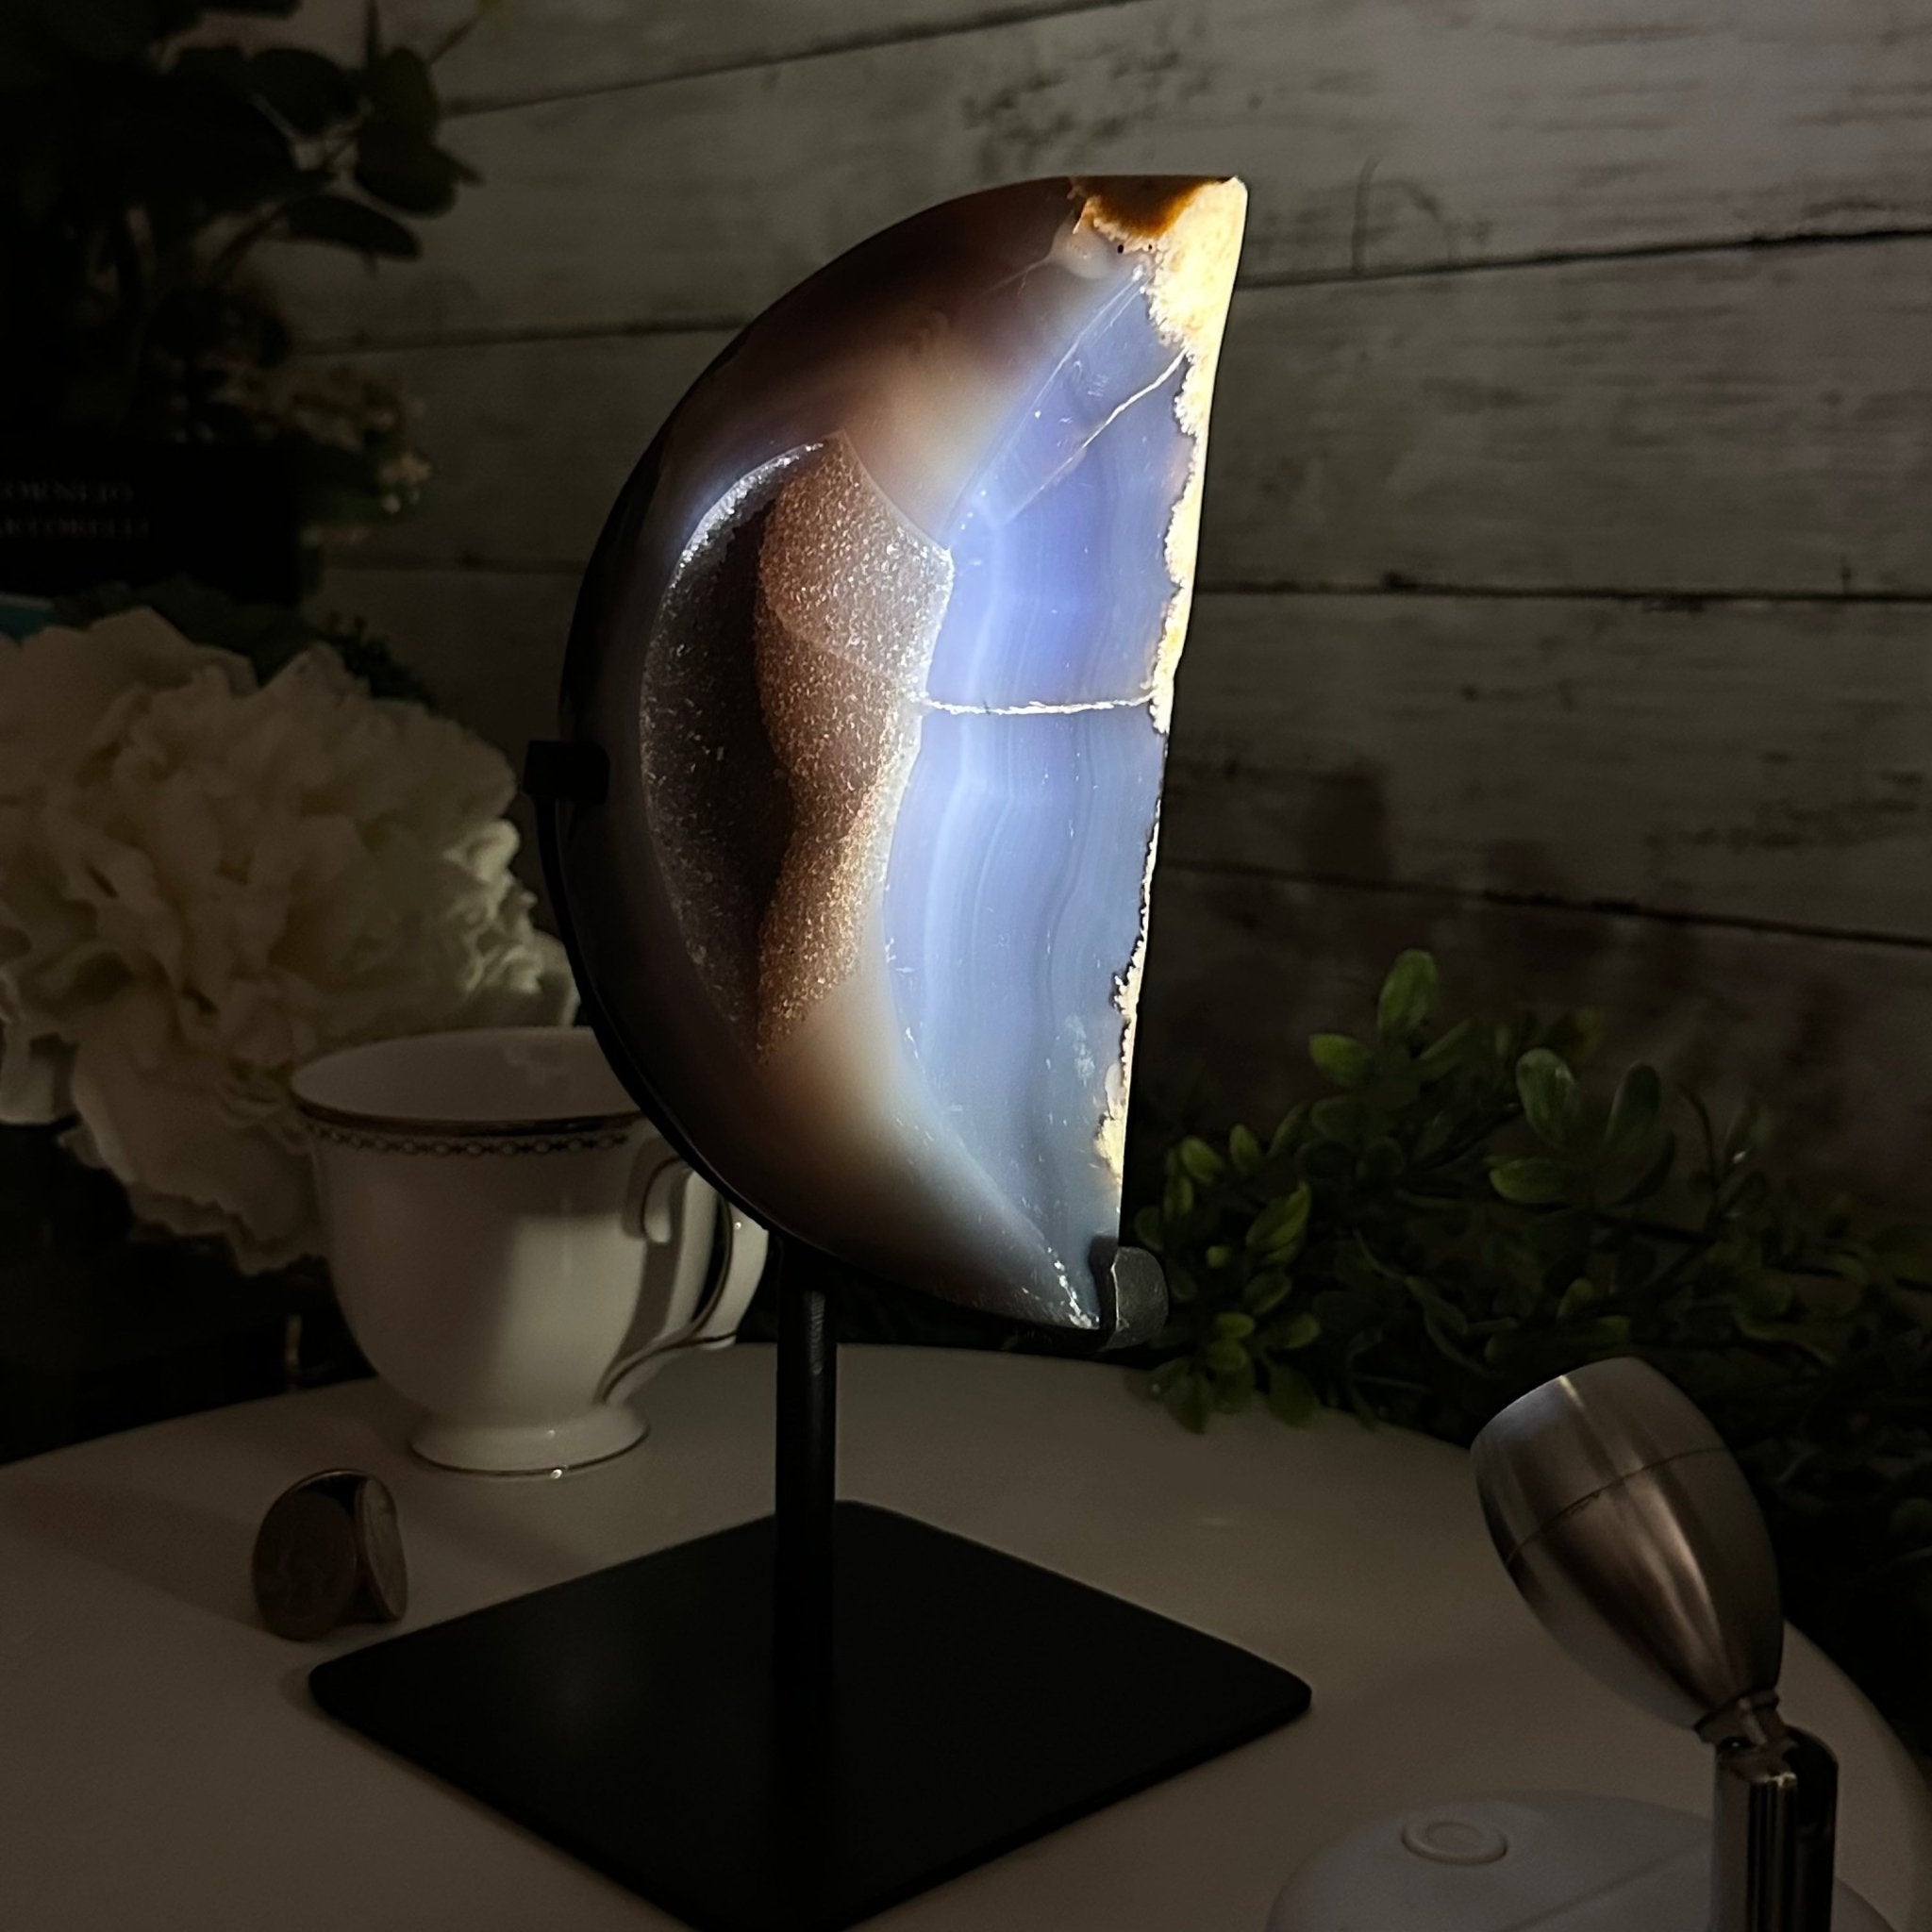 Polished Agate Crescent Moon on a Stand, 4.2 lbs & 9.5" Tall #5740NA-004 - Brazil GemsBrazil GemsPolished Agate Crescent Moon on a Stand, 4.2 lbs & 9.5" Tall #5740NA-004Crescent Moons5740NA-004